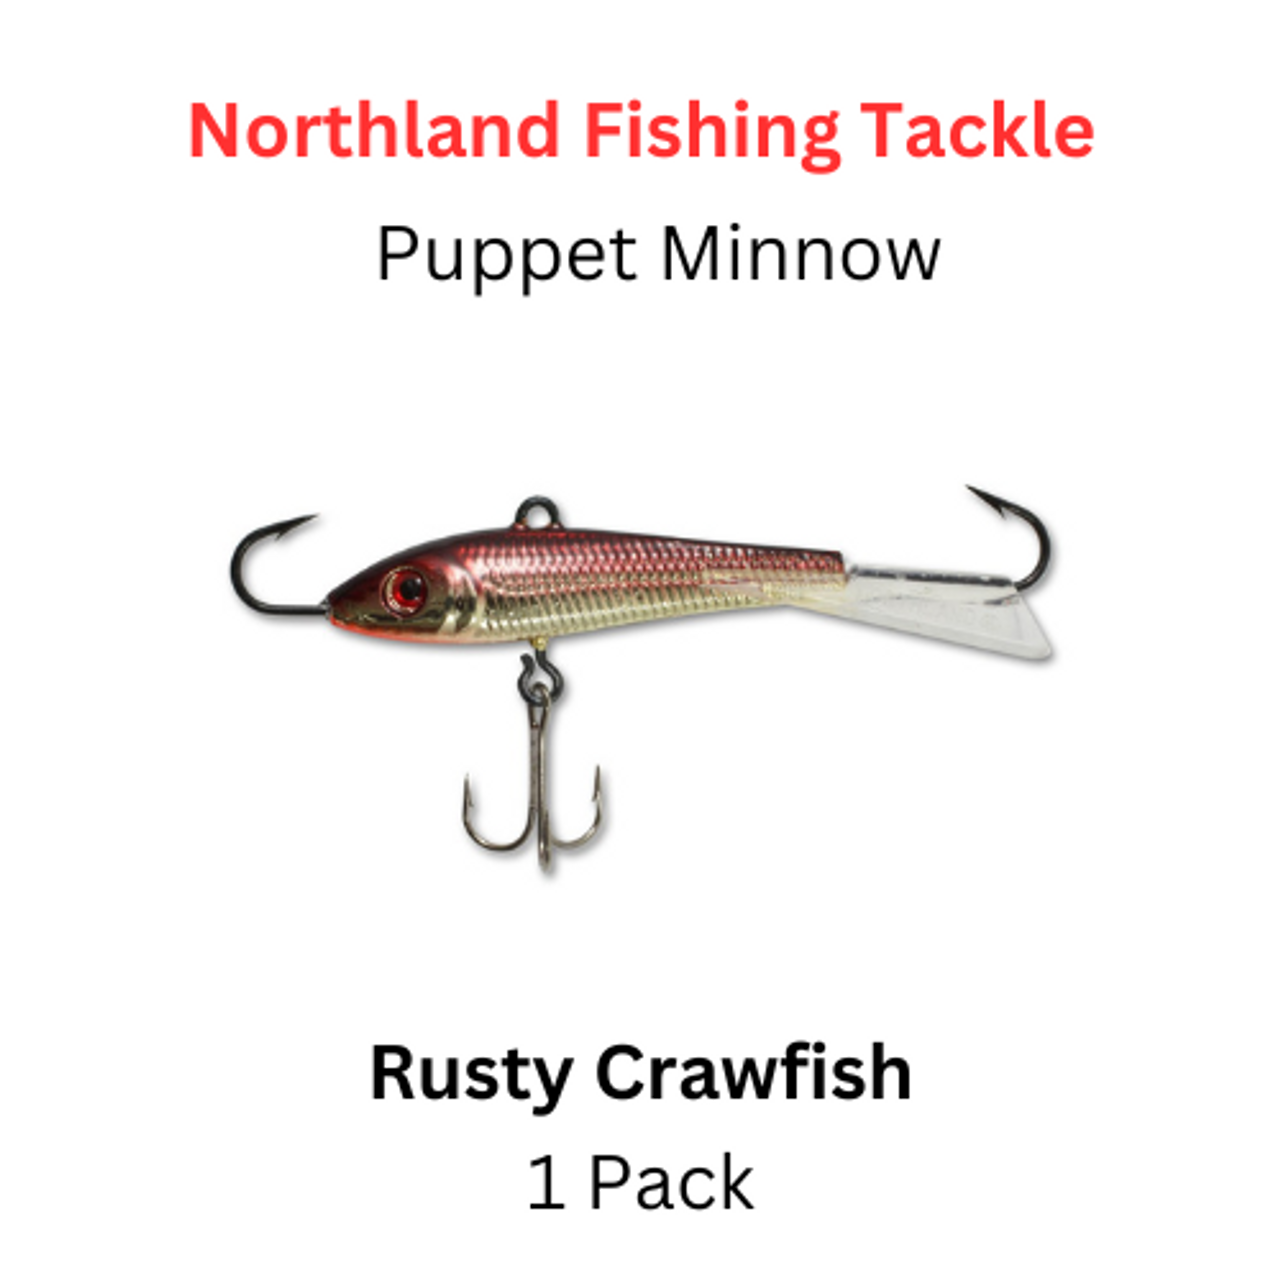 https://cdn11.bigcommerce.com/s-u9nbd/images/stencil/1280x1280/products/6196/15647/Northland_Fishing_Tackle_Puppet_Minnow_Rusty_Crawfish__34969.1676753791.png?c=2